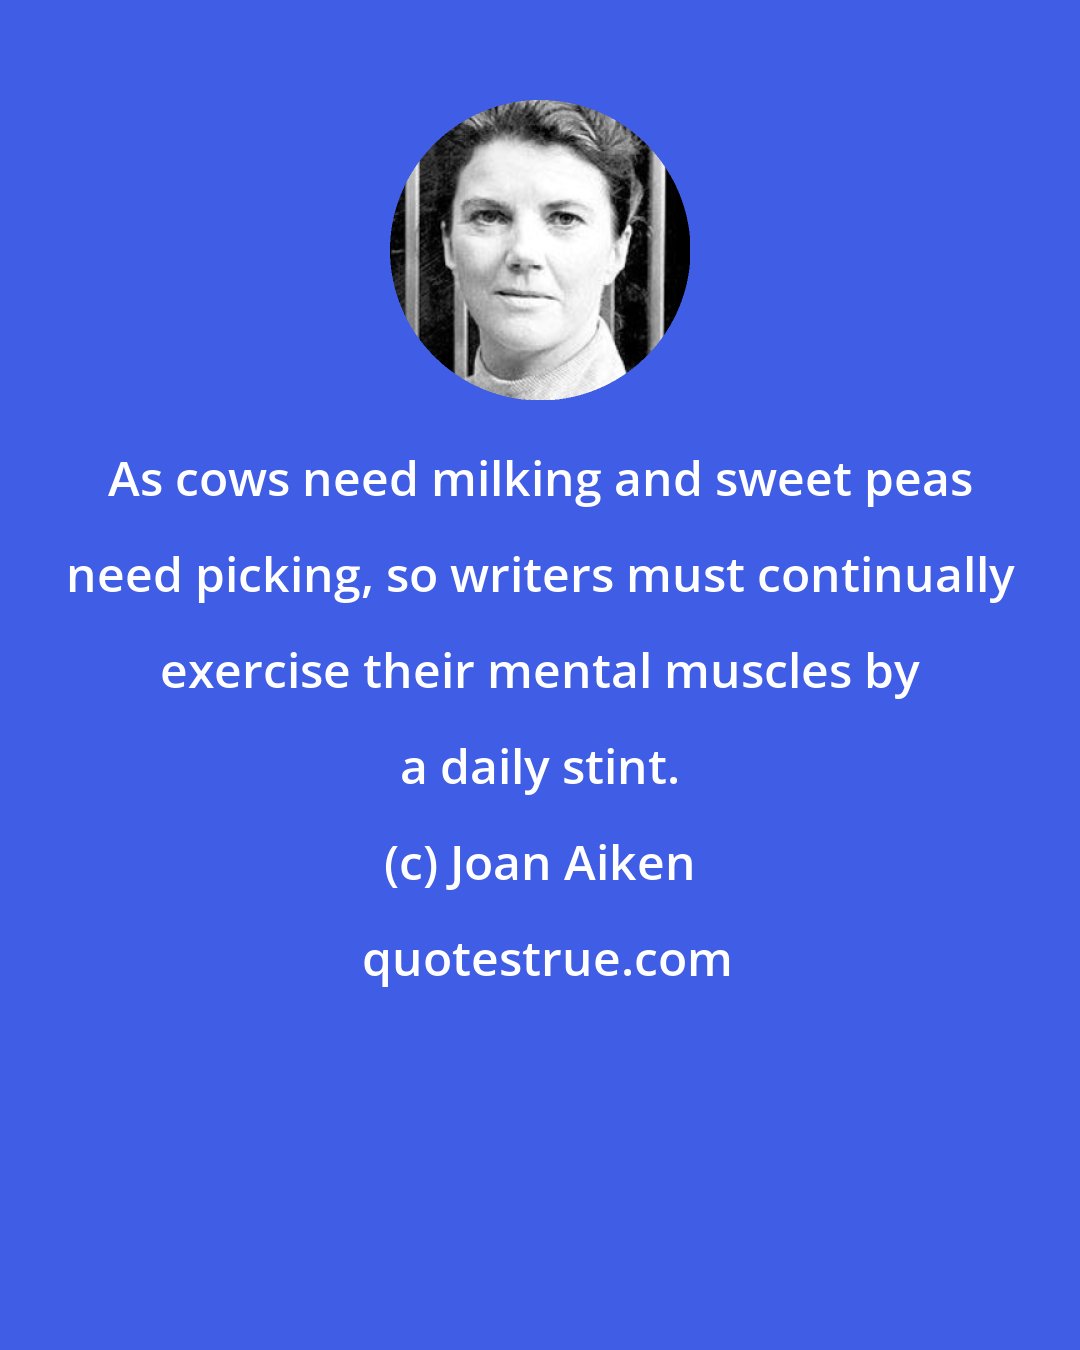 Joan Aiken: As cows need milking and sweet peas need picking, so writers must continually exercise their mental muscles by a daily stint.